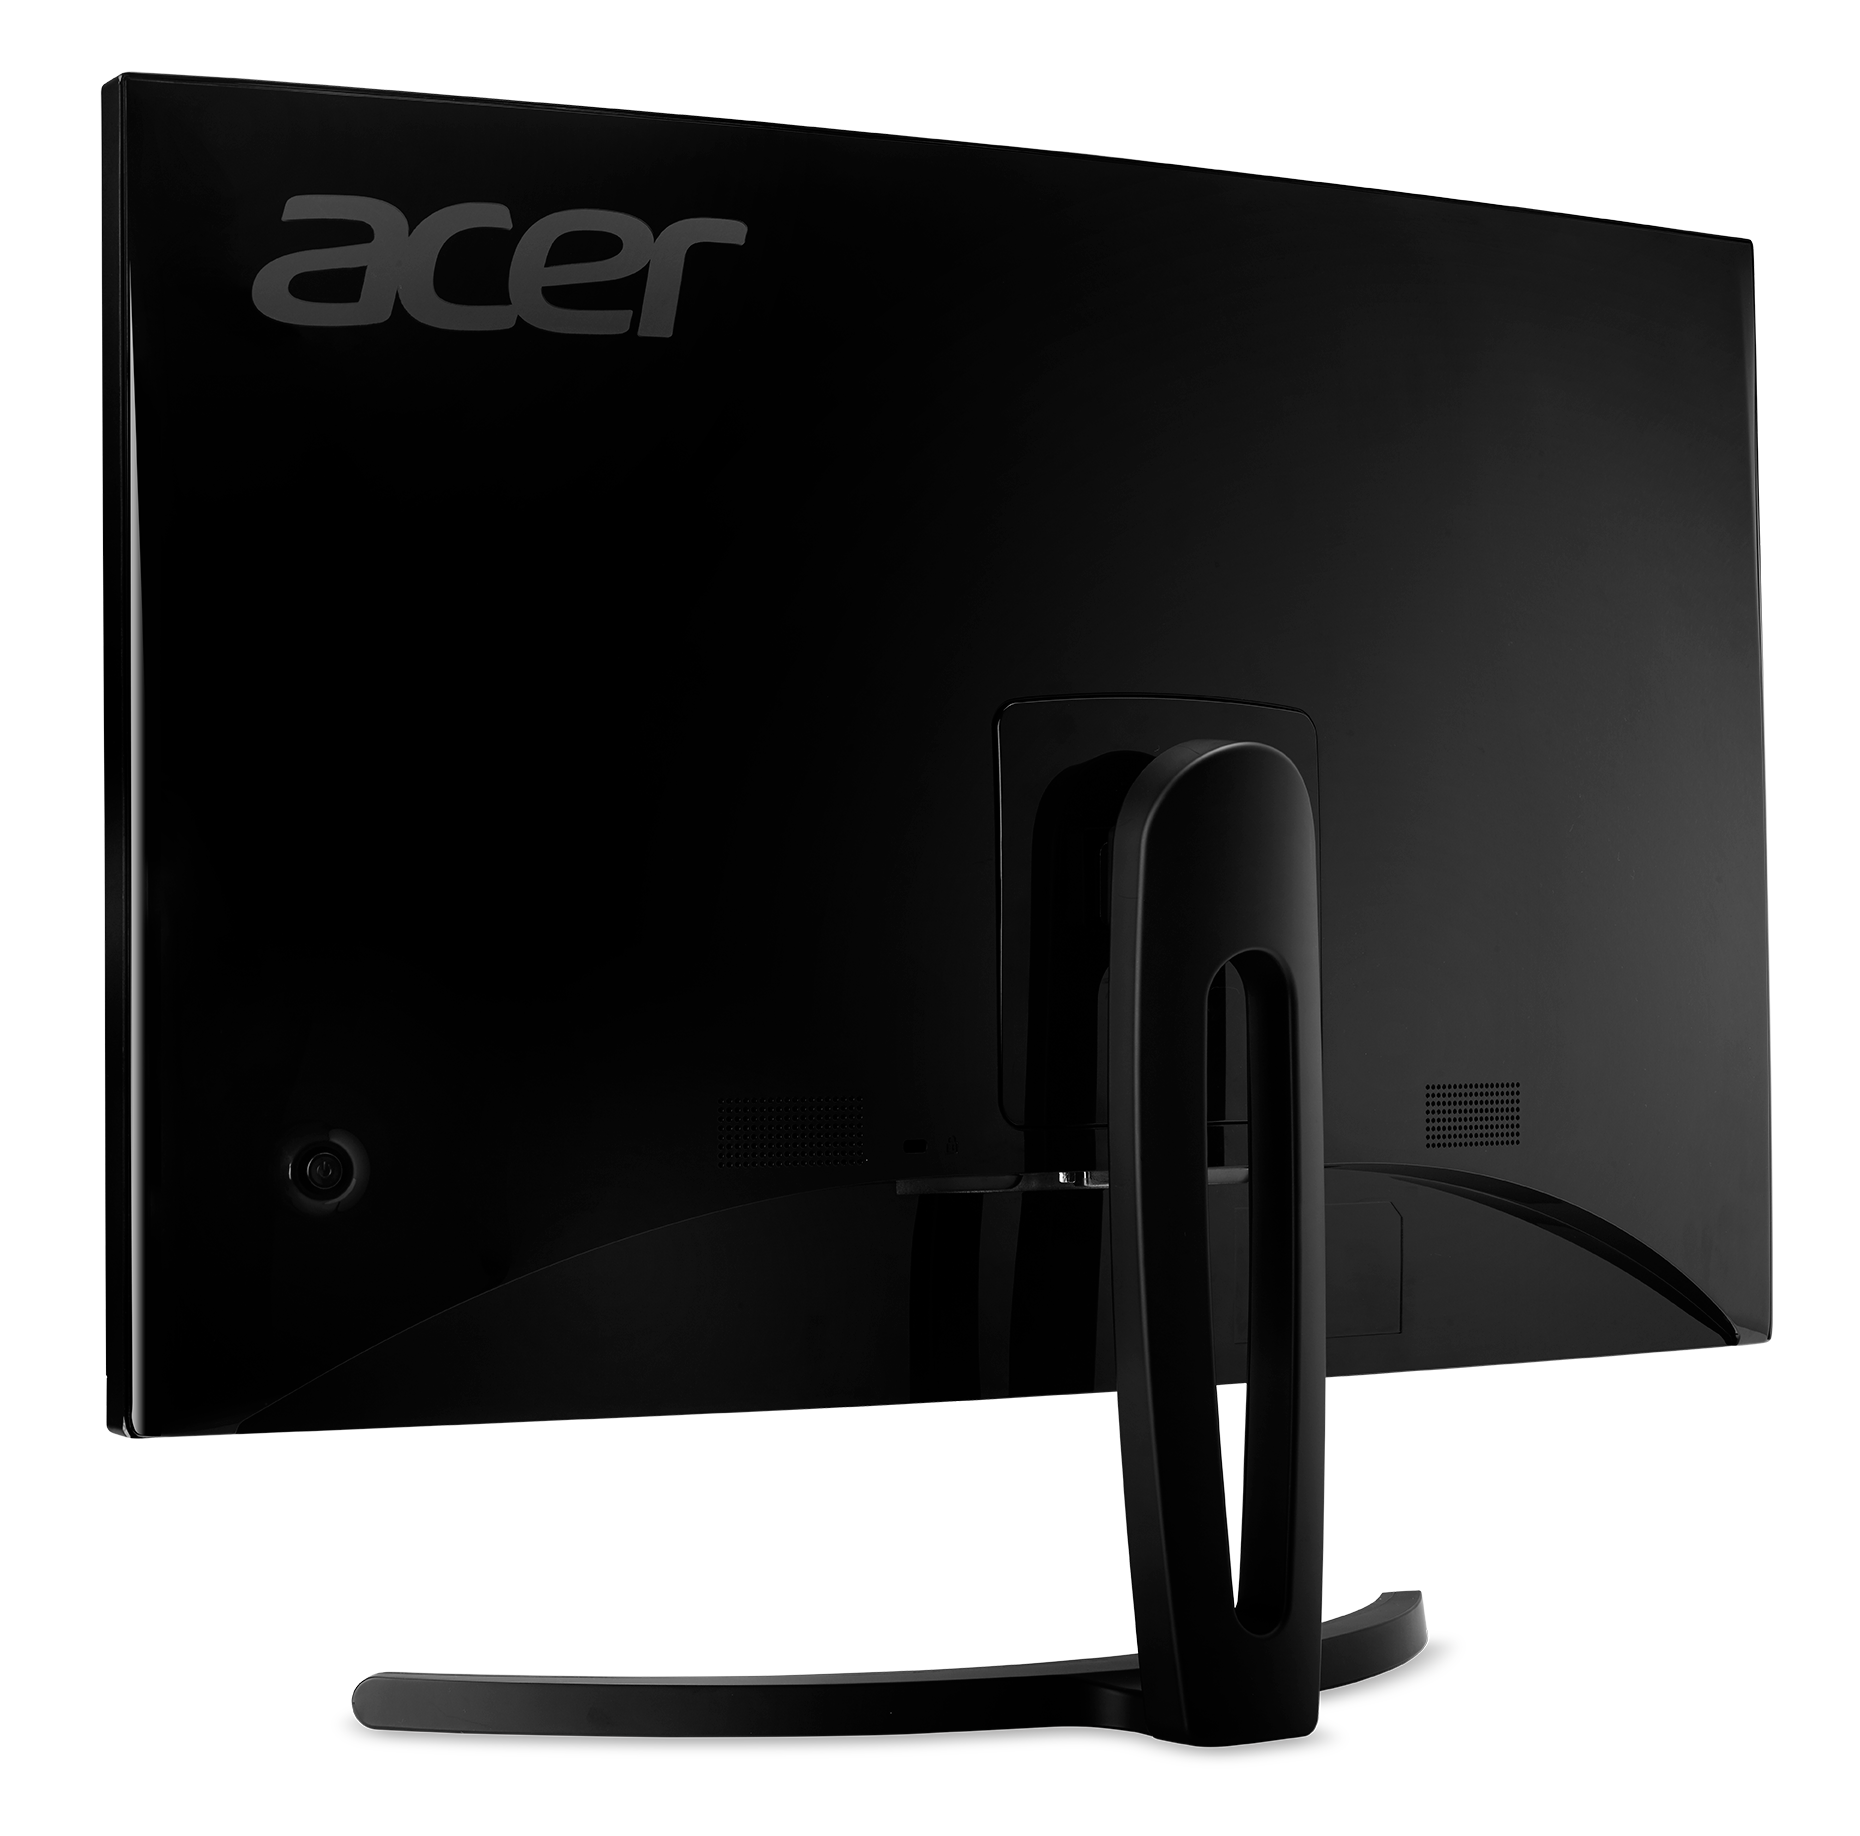 Acer ED273 Bbmiix 27" Curved Full HD (1920 x 1080) Zero Frame Monitor with AMD FreeSync Technology, 75Hz, 1ms VRB - image 5 of 5